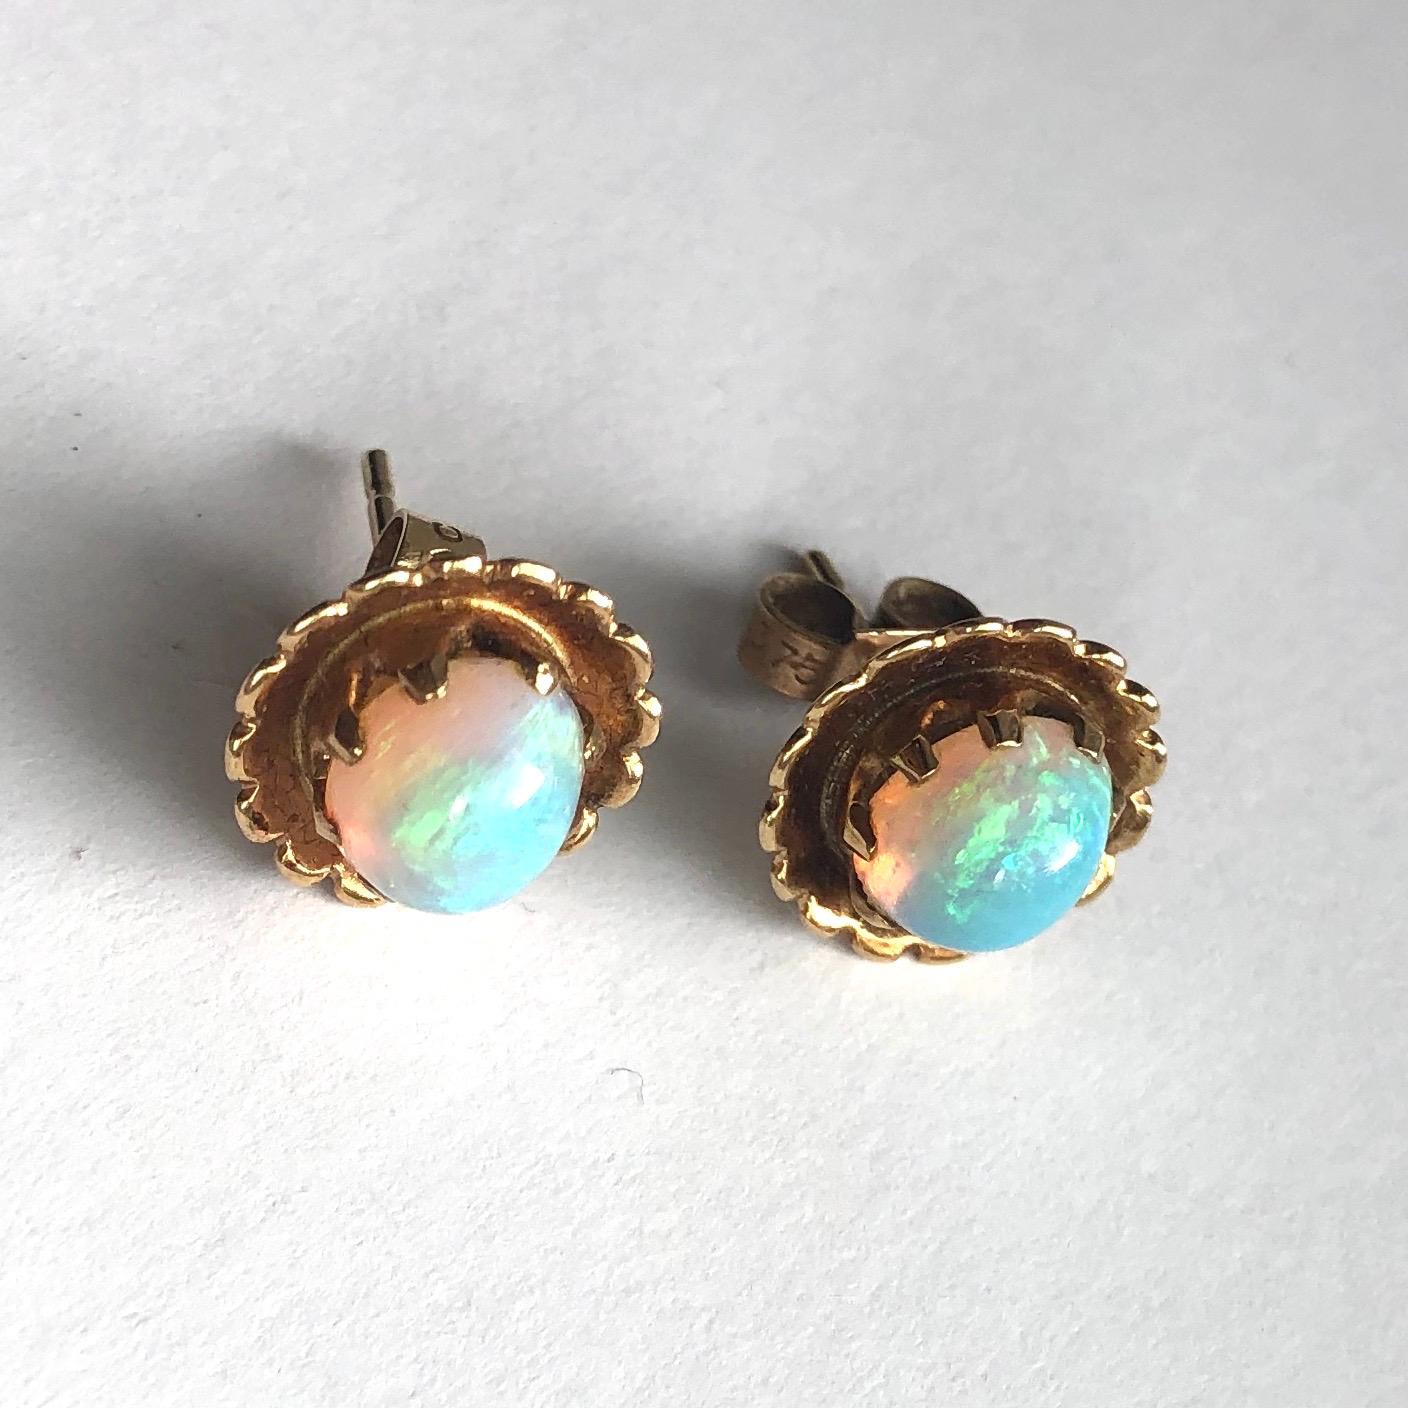 These Opals throw magnificent colours. They are held in simple claw settings and then have a gorgeous scalloped frame surrounding them. Modelled in 9ct gold. 

Earring Diameter: 11mm
Opals Longest Diameter: 7.5mm 
Height From Ear: 7mm 

Weight: 2.47g